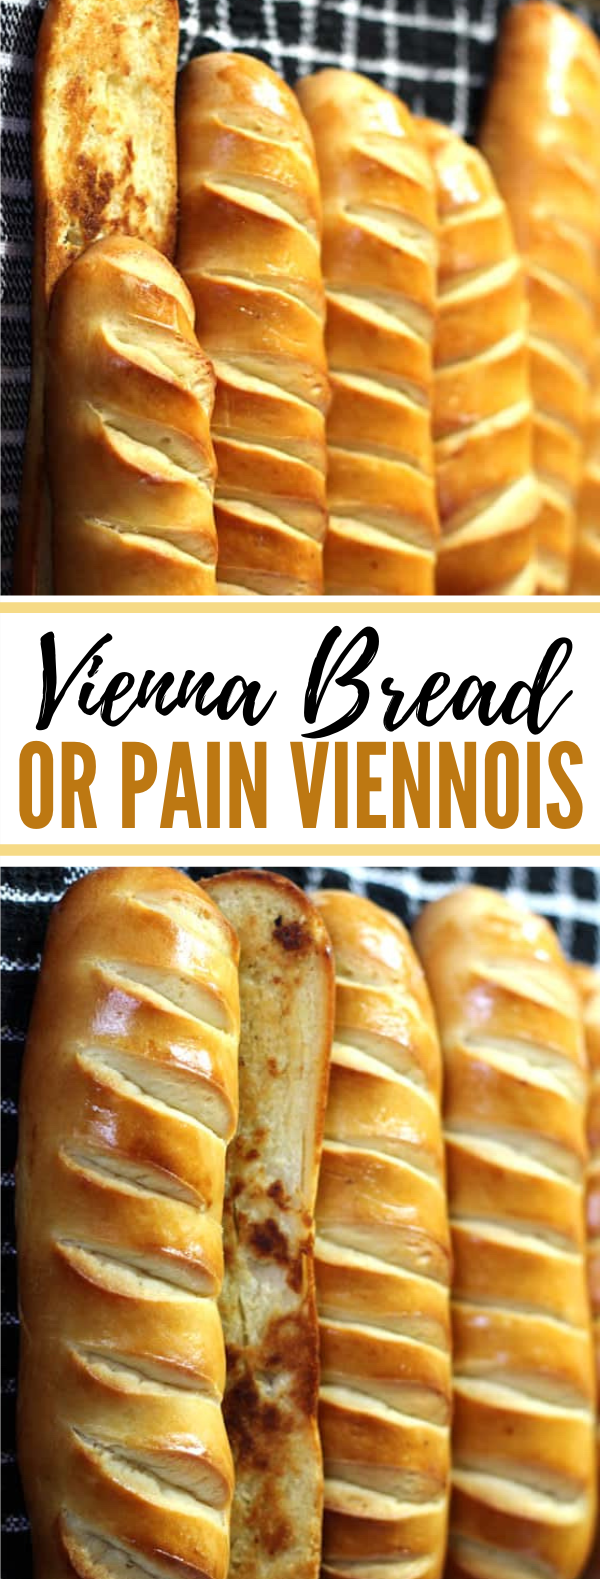 VIENNA BREAD – EASY AND HOMEMADE #dinner #meals